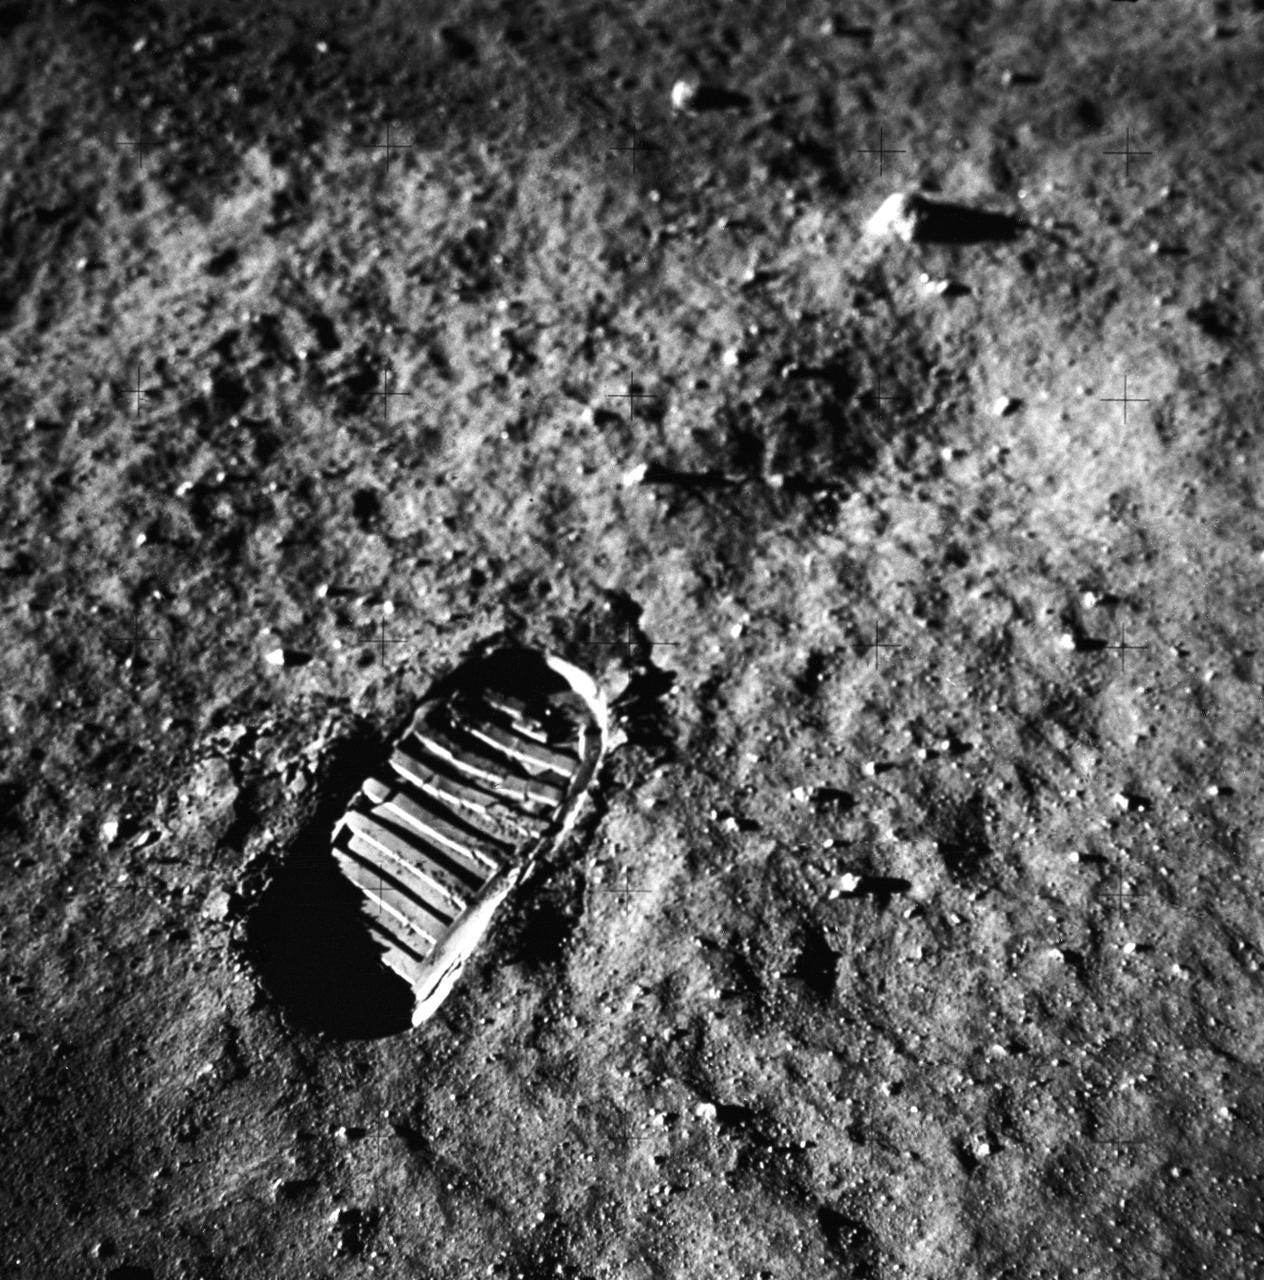 This is a close-up view of an astronaut’s footprint in the lunar soil, photographed by a 70 mm lunar surface camera during the Apollo 11 lunar surface extravehicular activity. The first manned lunar mission, the Apollo 11 launched aboard a Saturn V launch vehicle from the Kennedy Space Center, Florida on July 16, 1969 and safely returned to Earth on July 24, 1969. The 3-man crew aboard the flight consisted of Neil A, Armstrong, mission commander; Edwin E. Aldrin, Jr., Lunar Module Pilot; and Michael Collins, Command Module pilot. The LM landed on the moon’s surface on July 20, 1969 in the region known as Mare Tranquilitatis (the Sea of Tranquility).  Armstrong was the first human to ever stand on the lunar surface. As he stepped off the LM, Armstrong proclaimed, “That’s one small step for man, one giant leap for mankind”. He was followed by Edwin (Buzz) Aldrin, describing the lunar surface as Magnificent desolation.  Astronaut Collins piloted the Command Module in a parking orbit around the Moon. The crew collected 47 pounds of lunar surface material which was returned to Earth for analysis. The surface exploration was concluded in 2½ hours. With the success of Apollo 11, the national objective to land men on the Moon and return them safely to Earth had been accomplished. The Saturn V vehicle was developed by the Marshall Space Flight Center (MSFC) under the direction of Dr. von Braun.